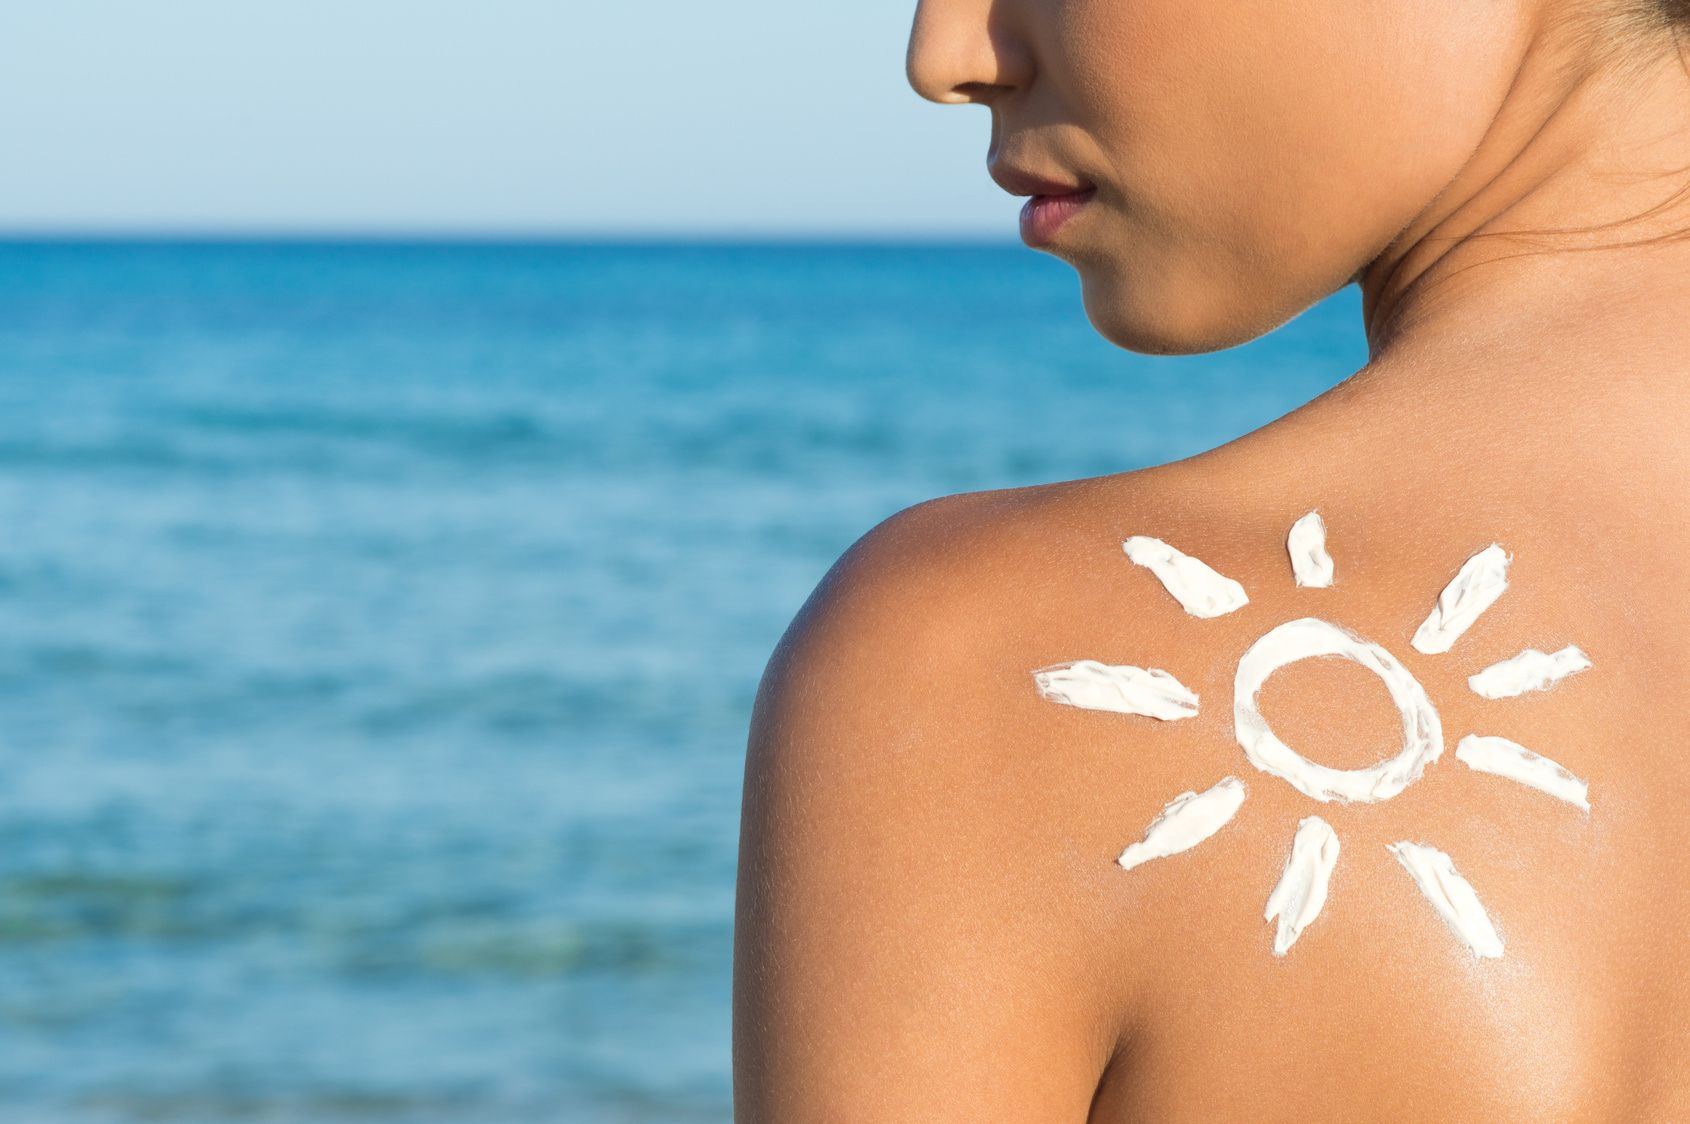 Skin Care Preparation for the Hot Summer Weather